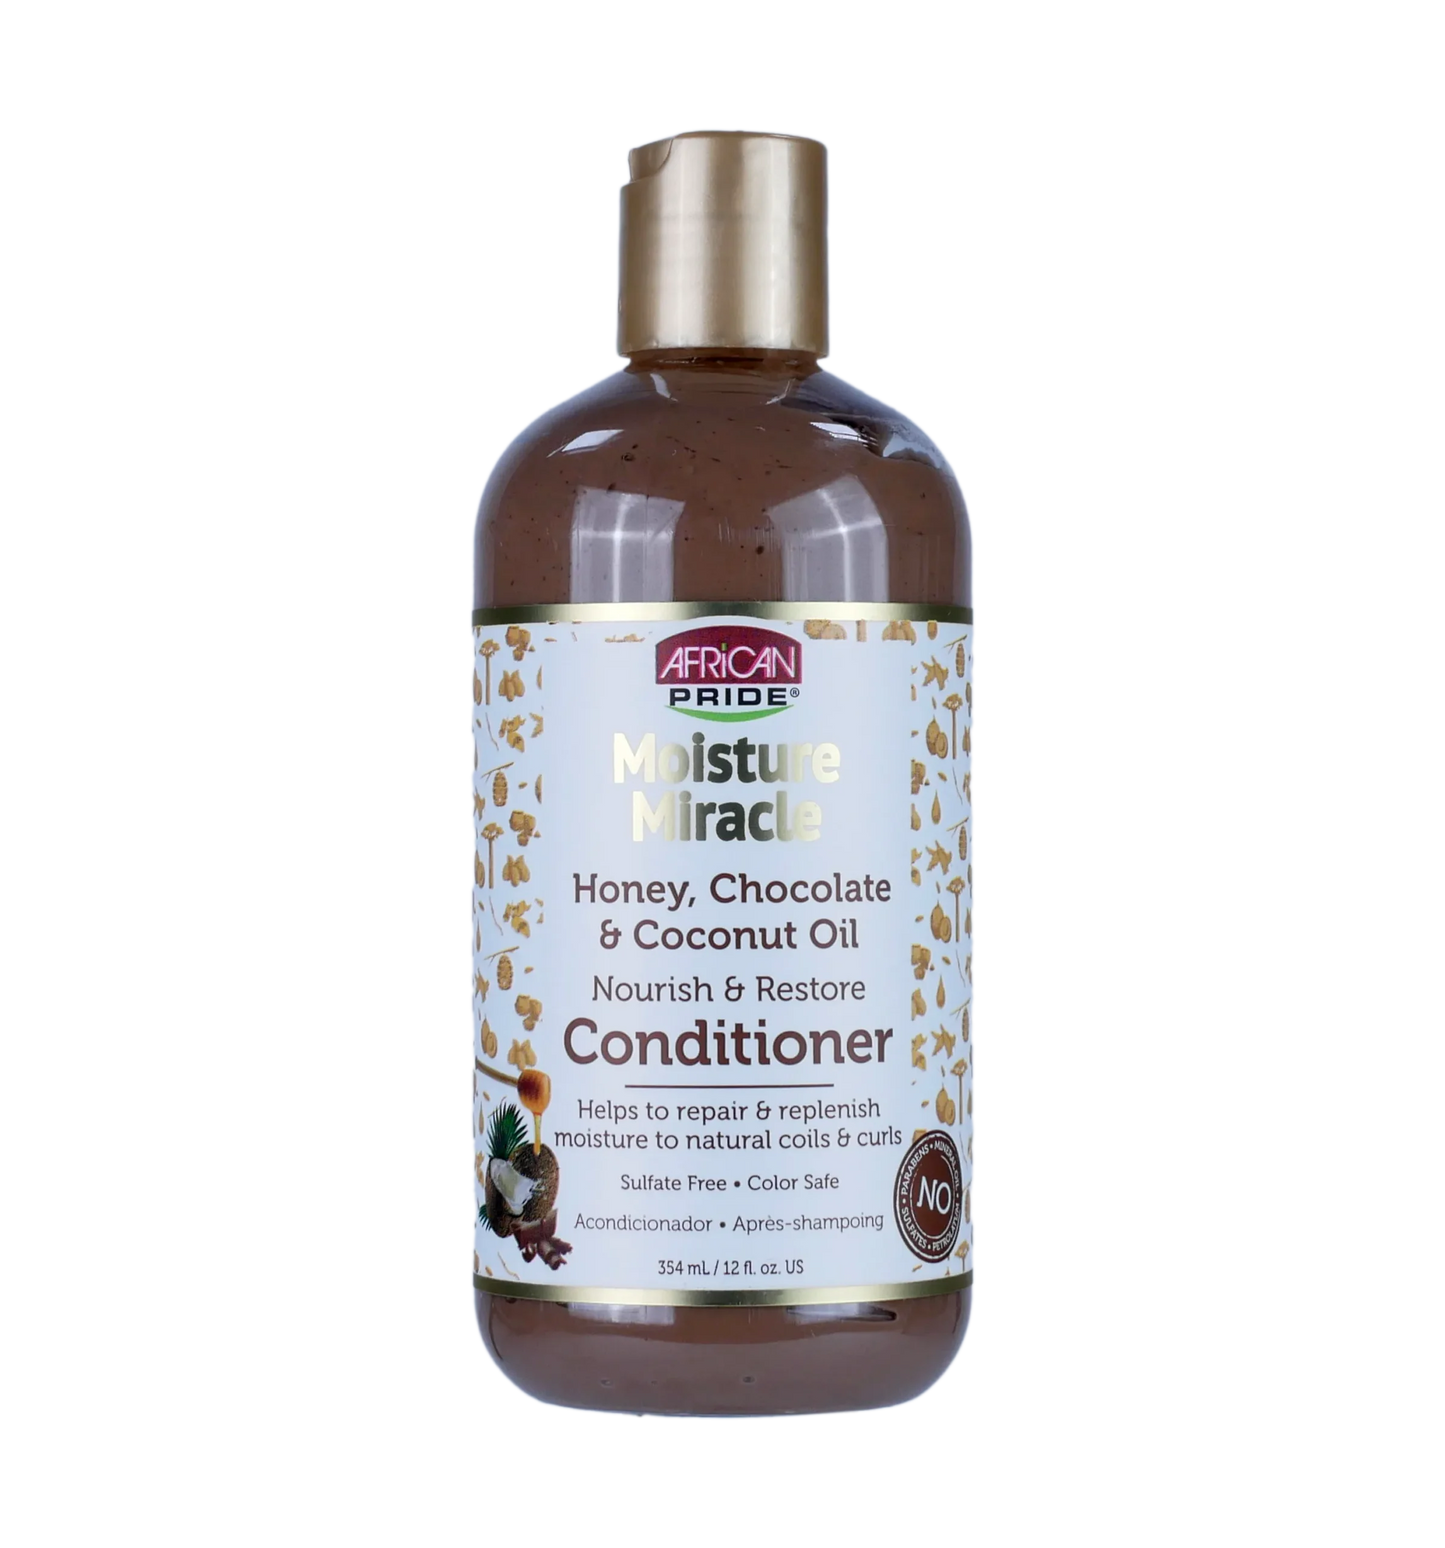 African Pride Moisture Miracle Honey Chocolate & Coconut Oil Conditioner